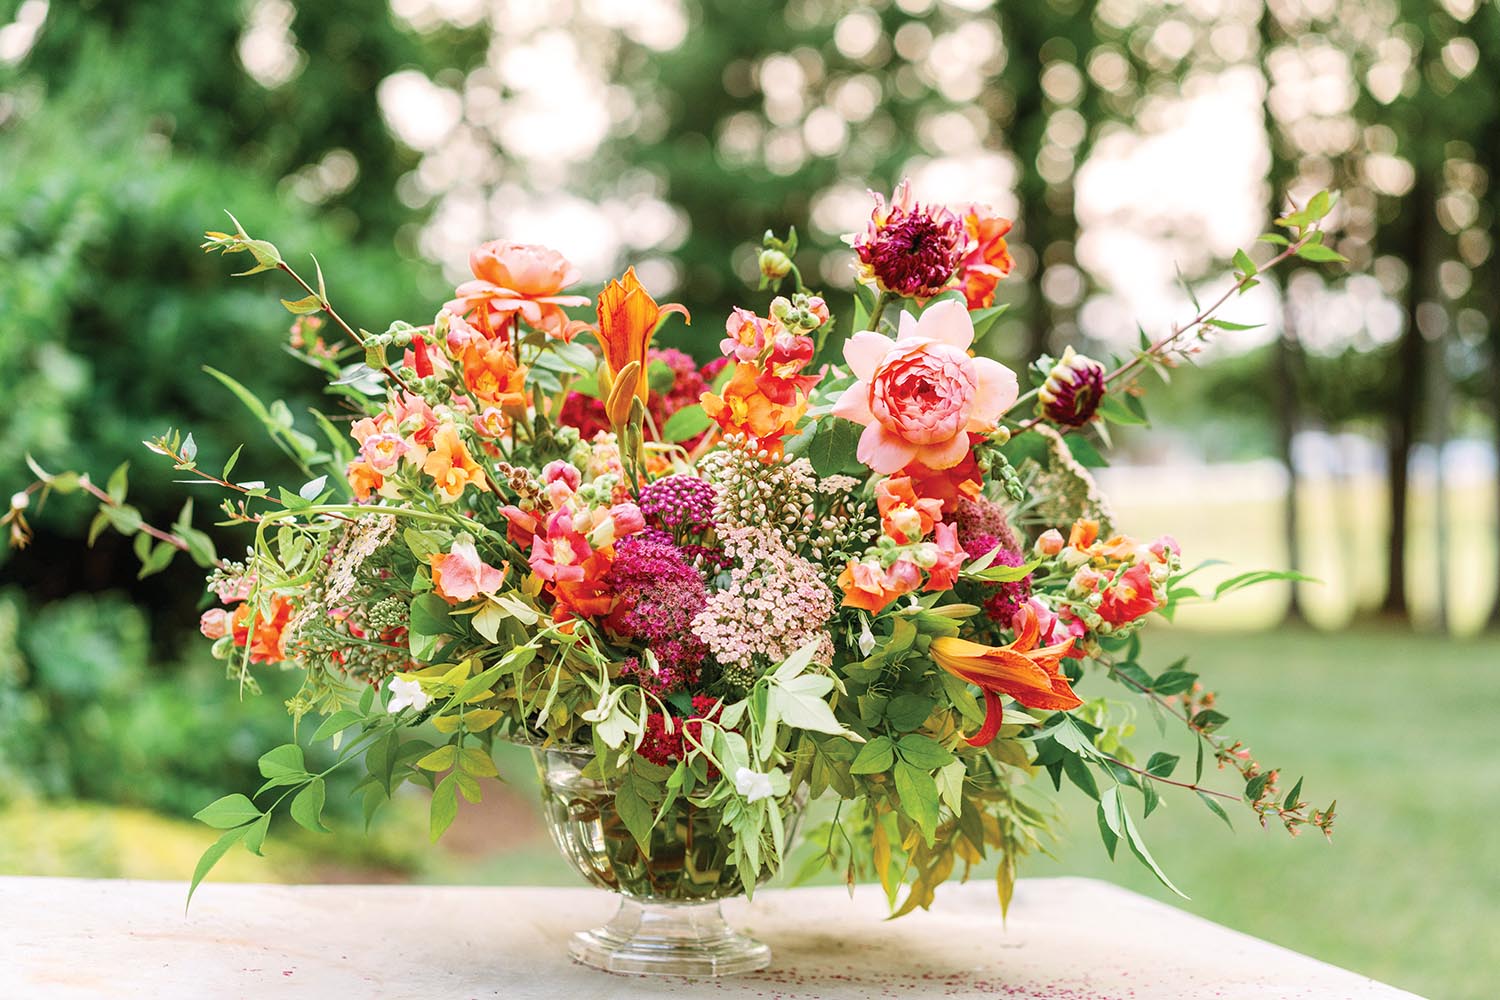 A bouquet of mixed flowers ranging from orange to pink to purple.